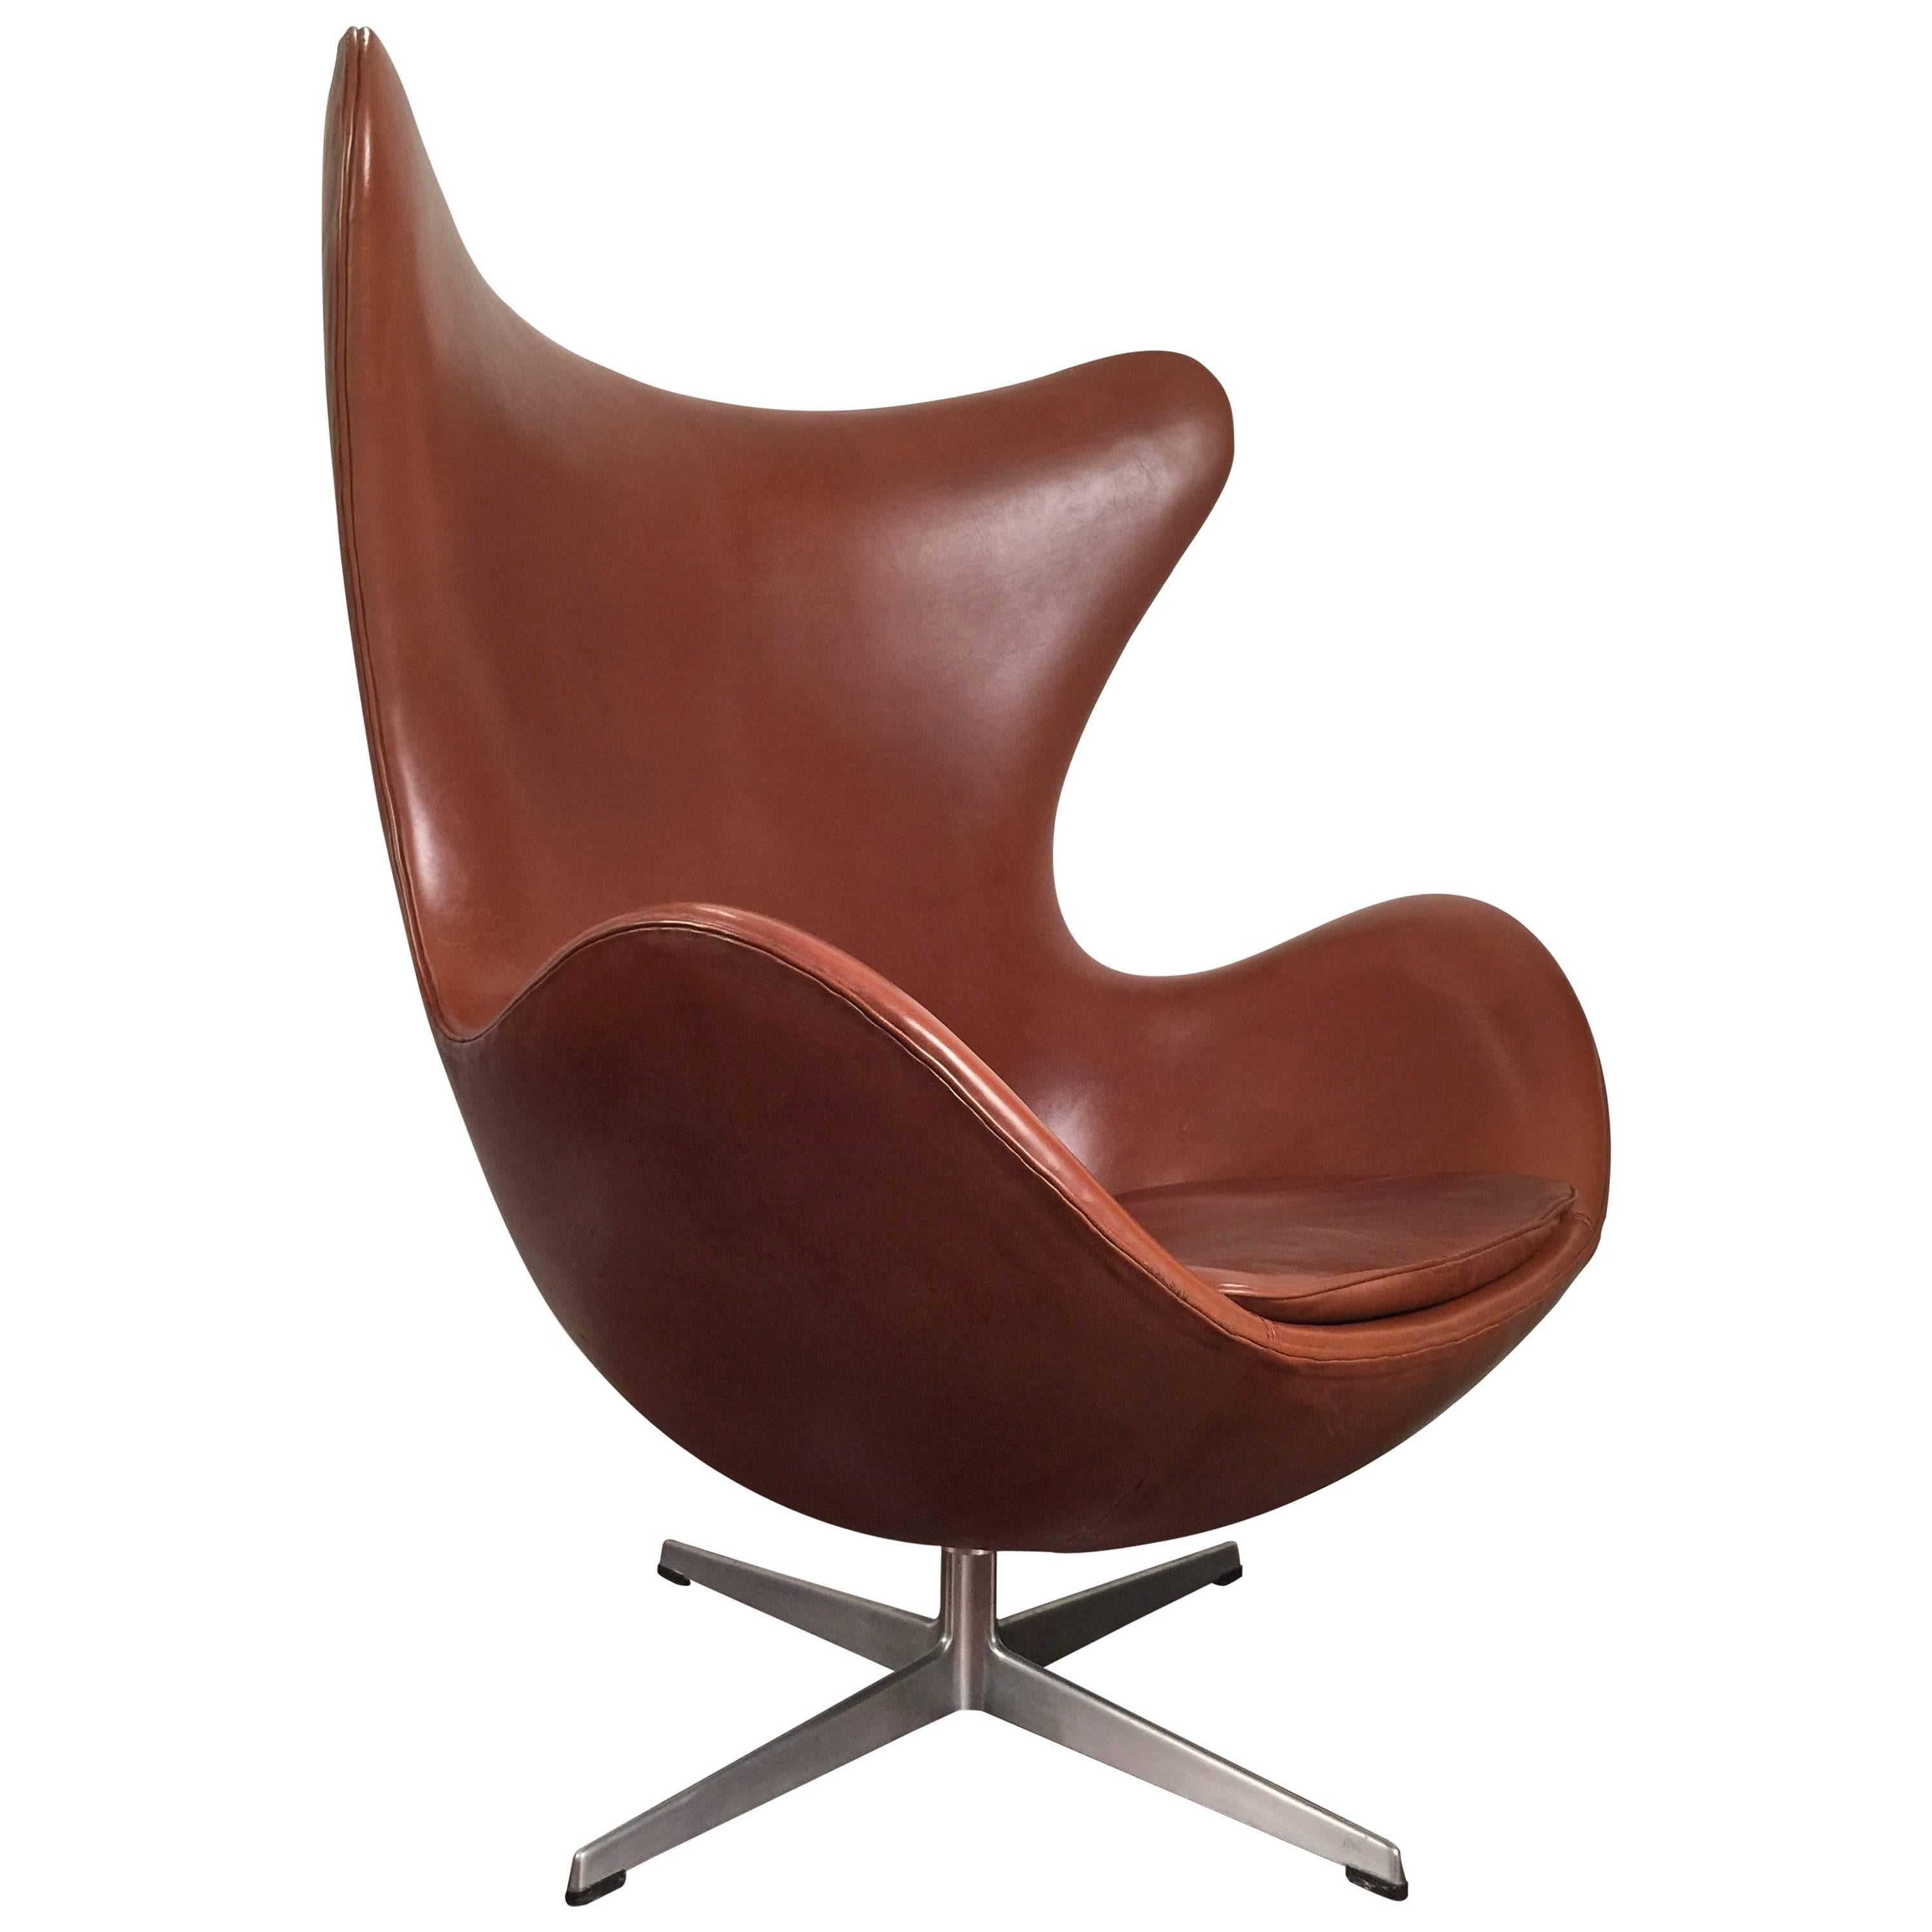 Early Arne Jacobsen Egg Chair in Original Brown Leather by Fritz Hansen